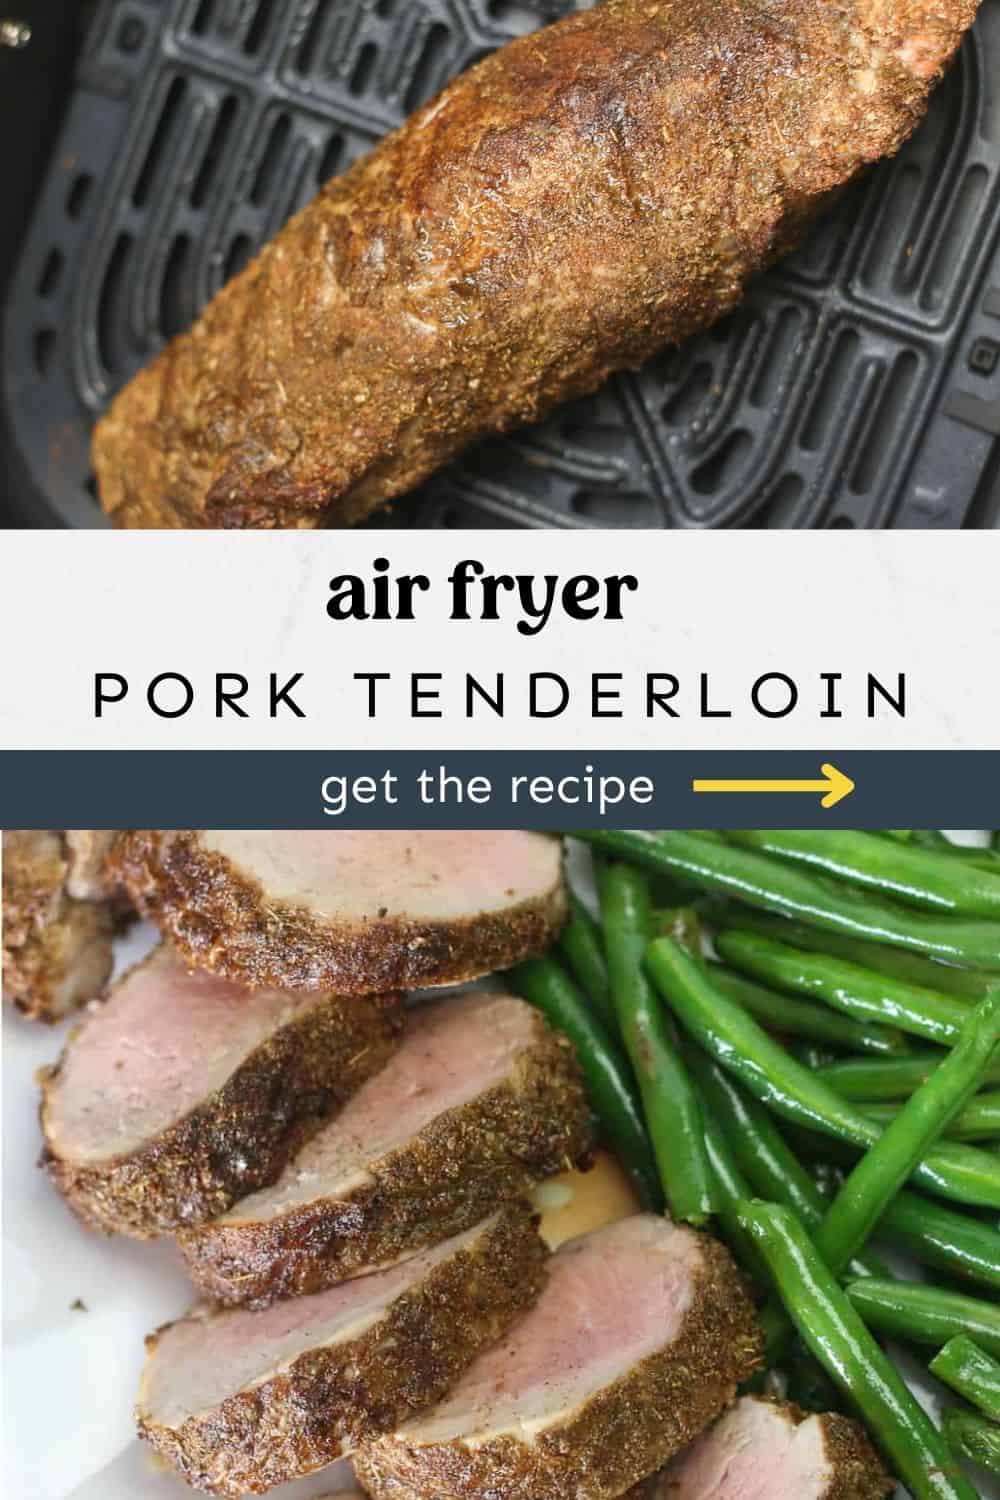 Pork tenderloin in the air fryer and some sliced on a platter with green beans.